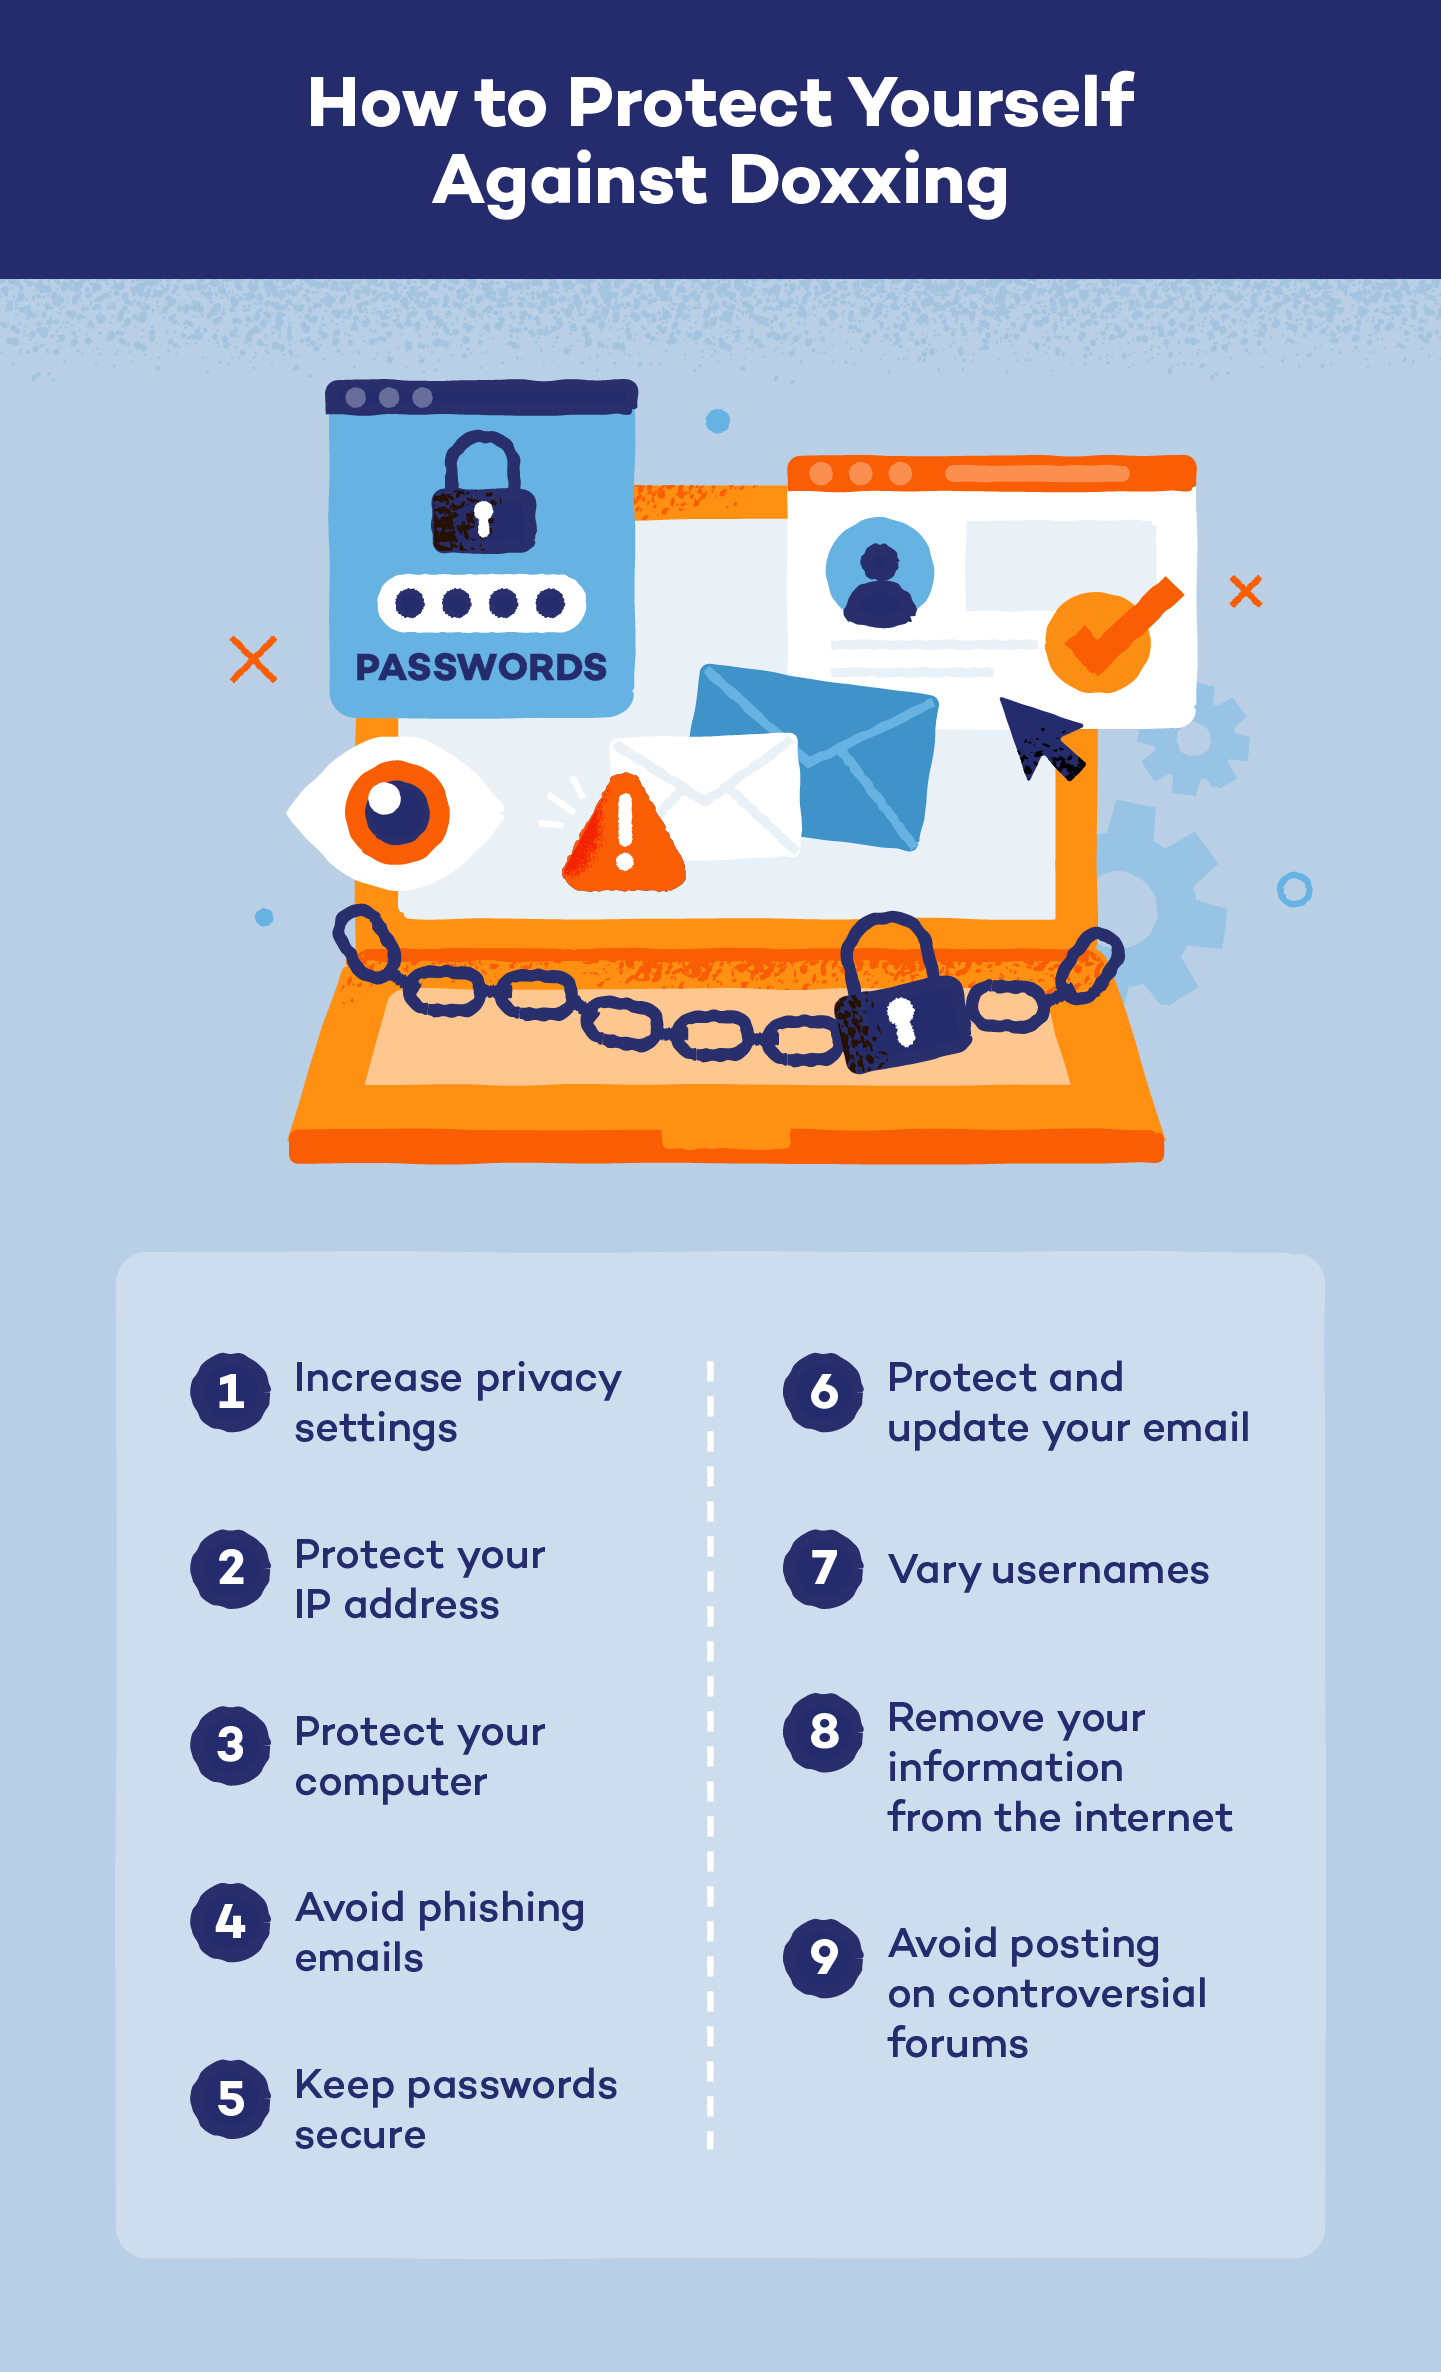 Illustration explaining ways to protect yourself against doxxing